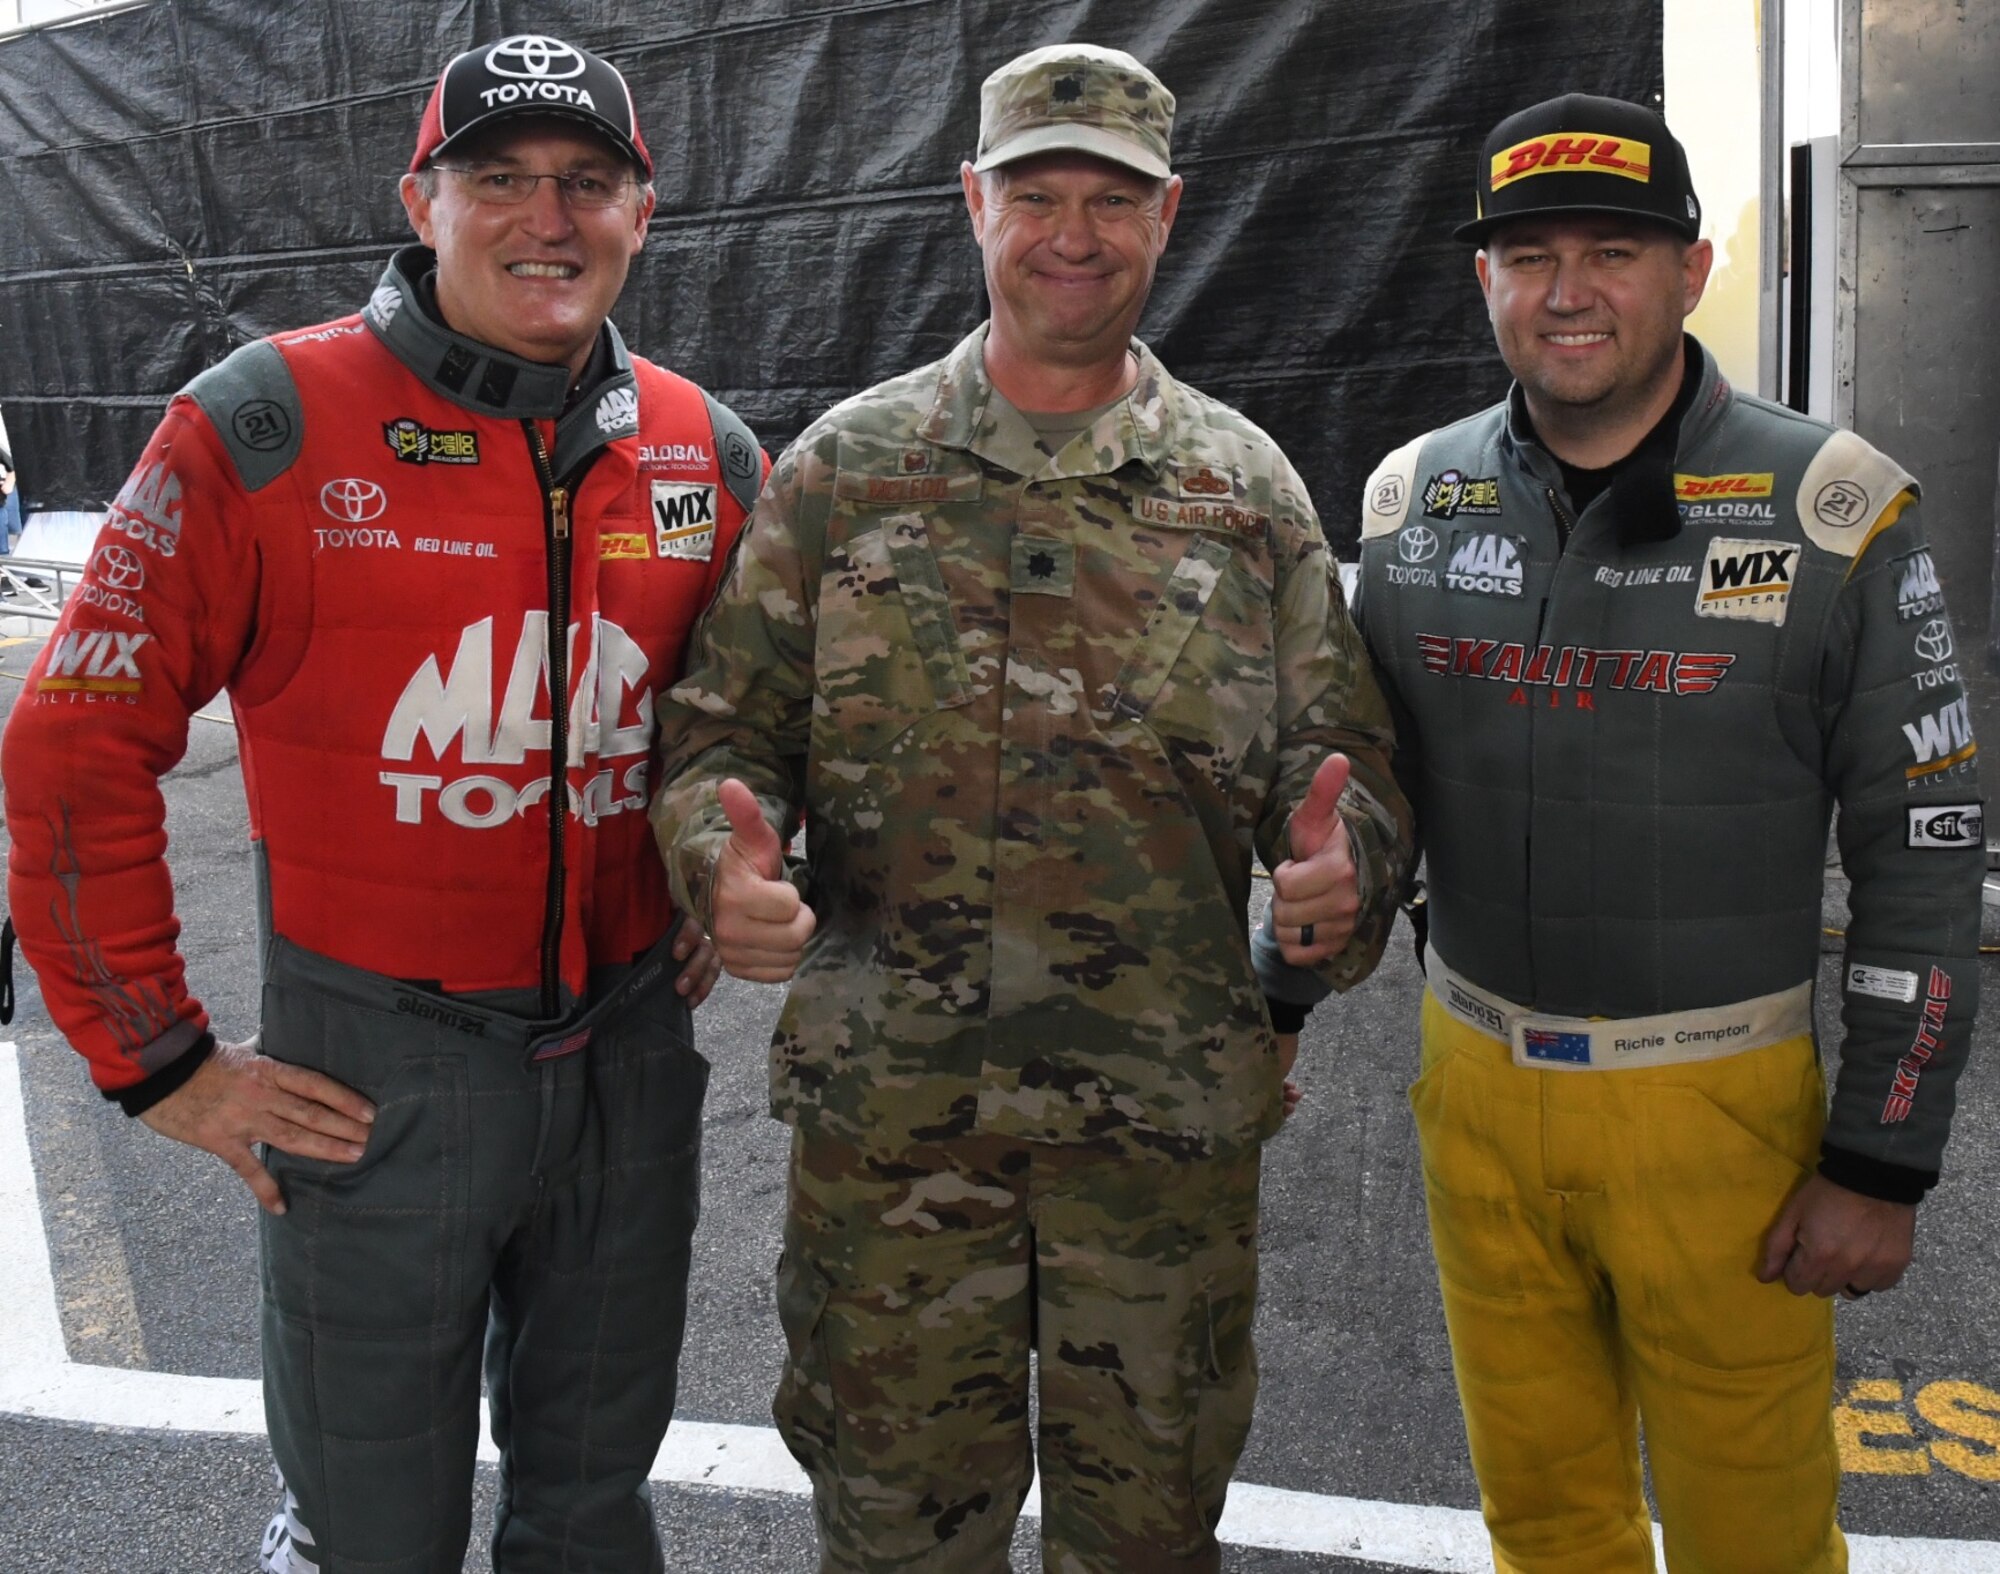 The National Hot Rod Association held their Midwest Nationals at the World Wide Technology Raceway at Gateway Motorsports, Madison Illinois, with Lt. Col. William McLeod, 932nd Maintenance Group commander, invited to help start the event as an honored guest, Sept. 29, 2019.  At left, Doug Kalitta is an American auto racing driver from Michigan and owner of the airline Kalitta Charters. Kalitta formerly raced in USAC events. He was the 1991 USAC rookie of the year in the midget series, and won the 1994 championship in the sprint car category while last year he won the season opener in Pomona, 
reached five final rounds, and  qualified for the NHRA Countdown to the Championship for the 11th year in a row.  At far right, driver Ritchie Crampton has 10 Career Wins, 12 Career Final Rounds and 329.91 miles per hour Career Best Speed.  Col. McLeod was brought on stage during the opening ceremony and presented an NHRA challenge coin, and waved to the cheering crowd.  (U.S. Air Force photo by Lt. Col. Stan Paregien)